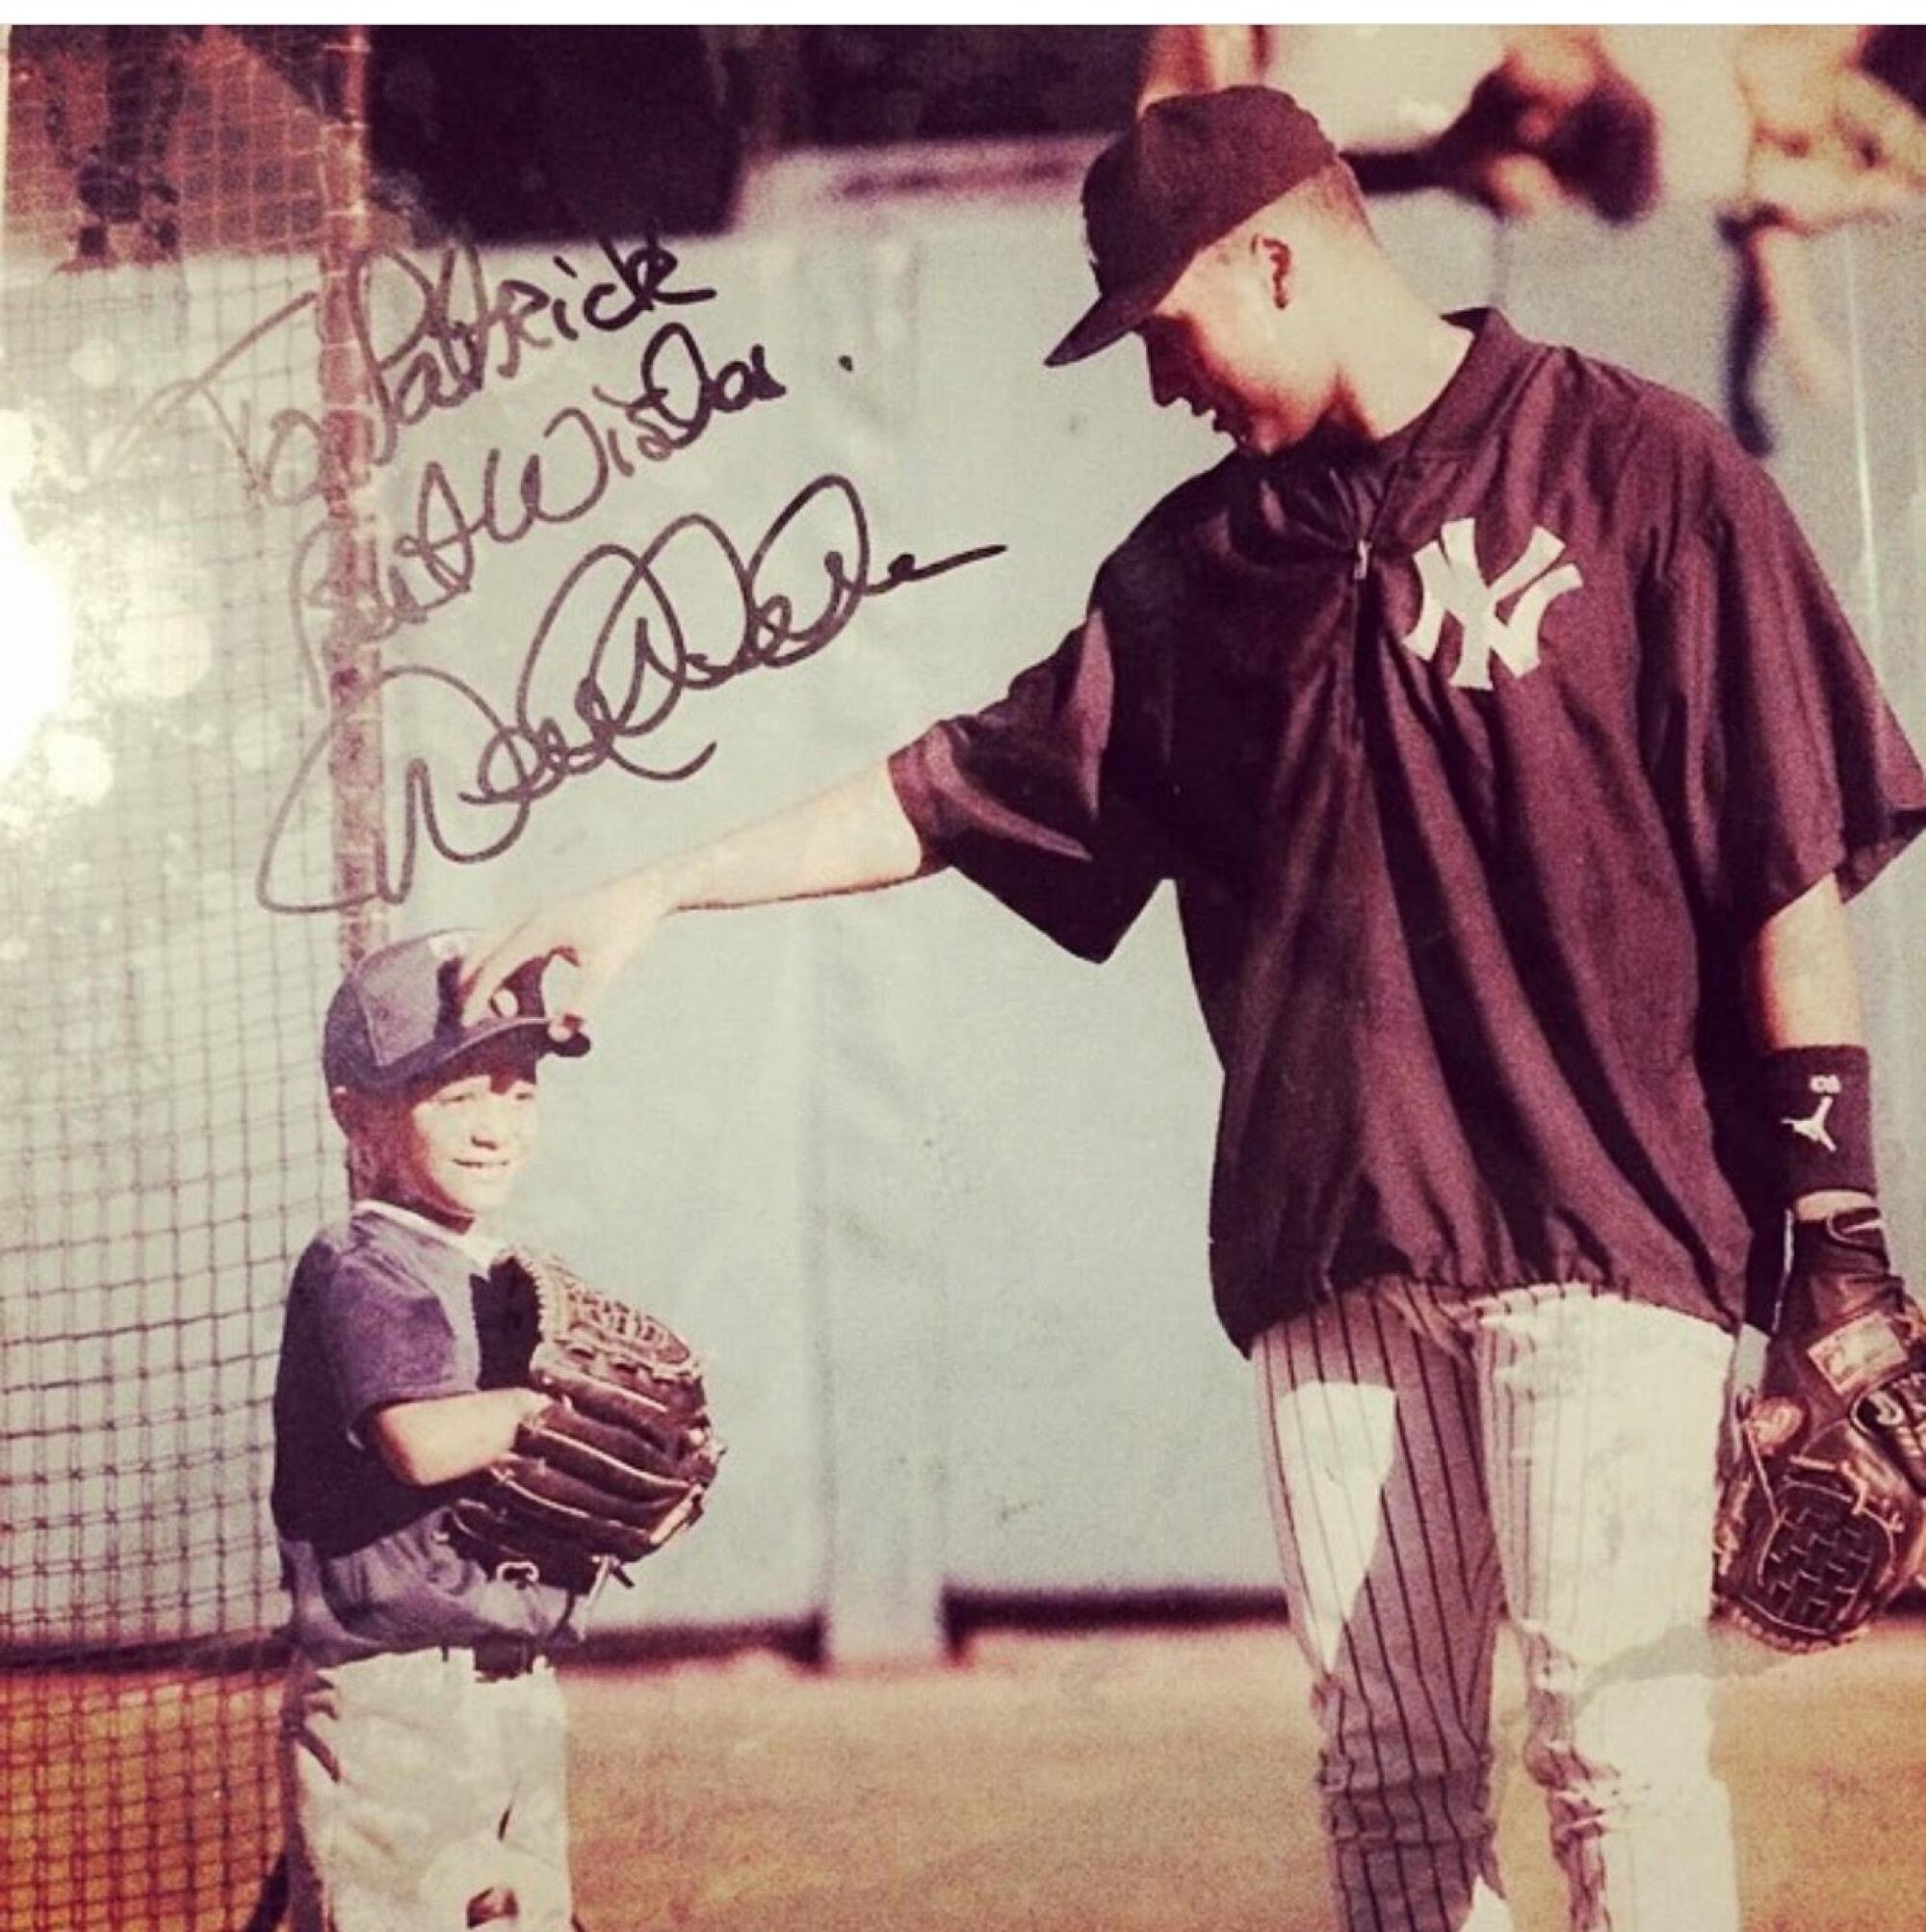 Yankees great Derek Jeter autographed this photo and gave it to little Patrick Mahomes.